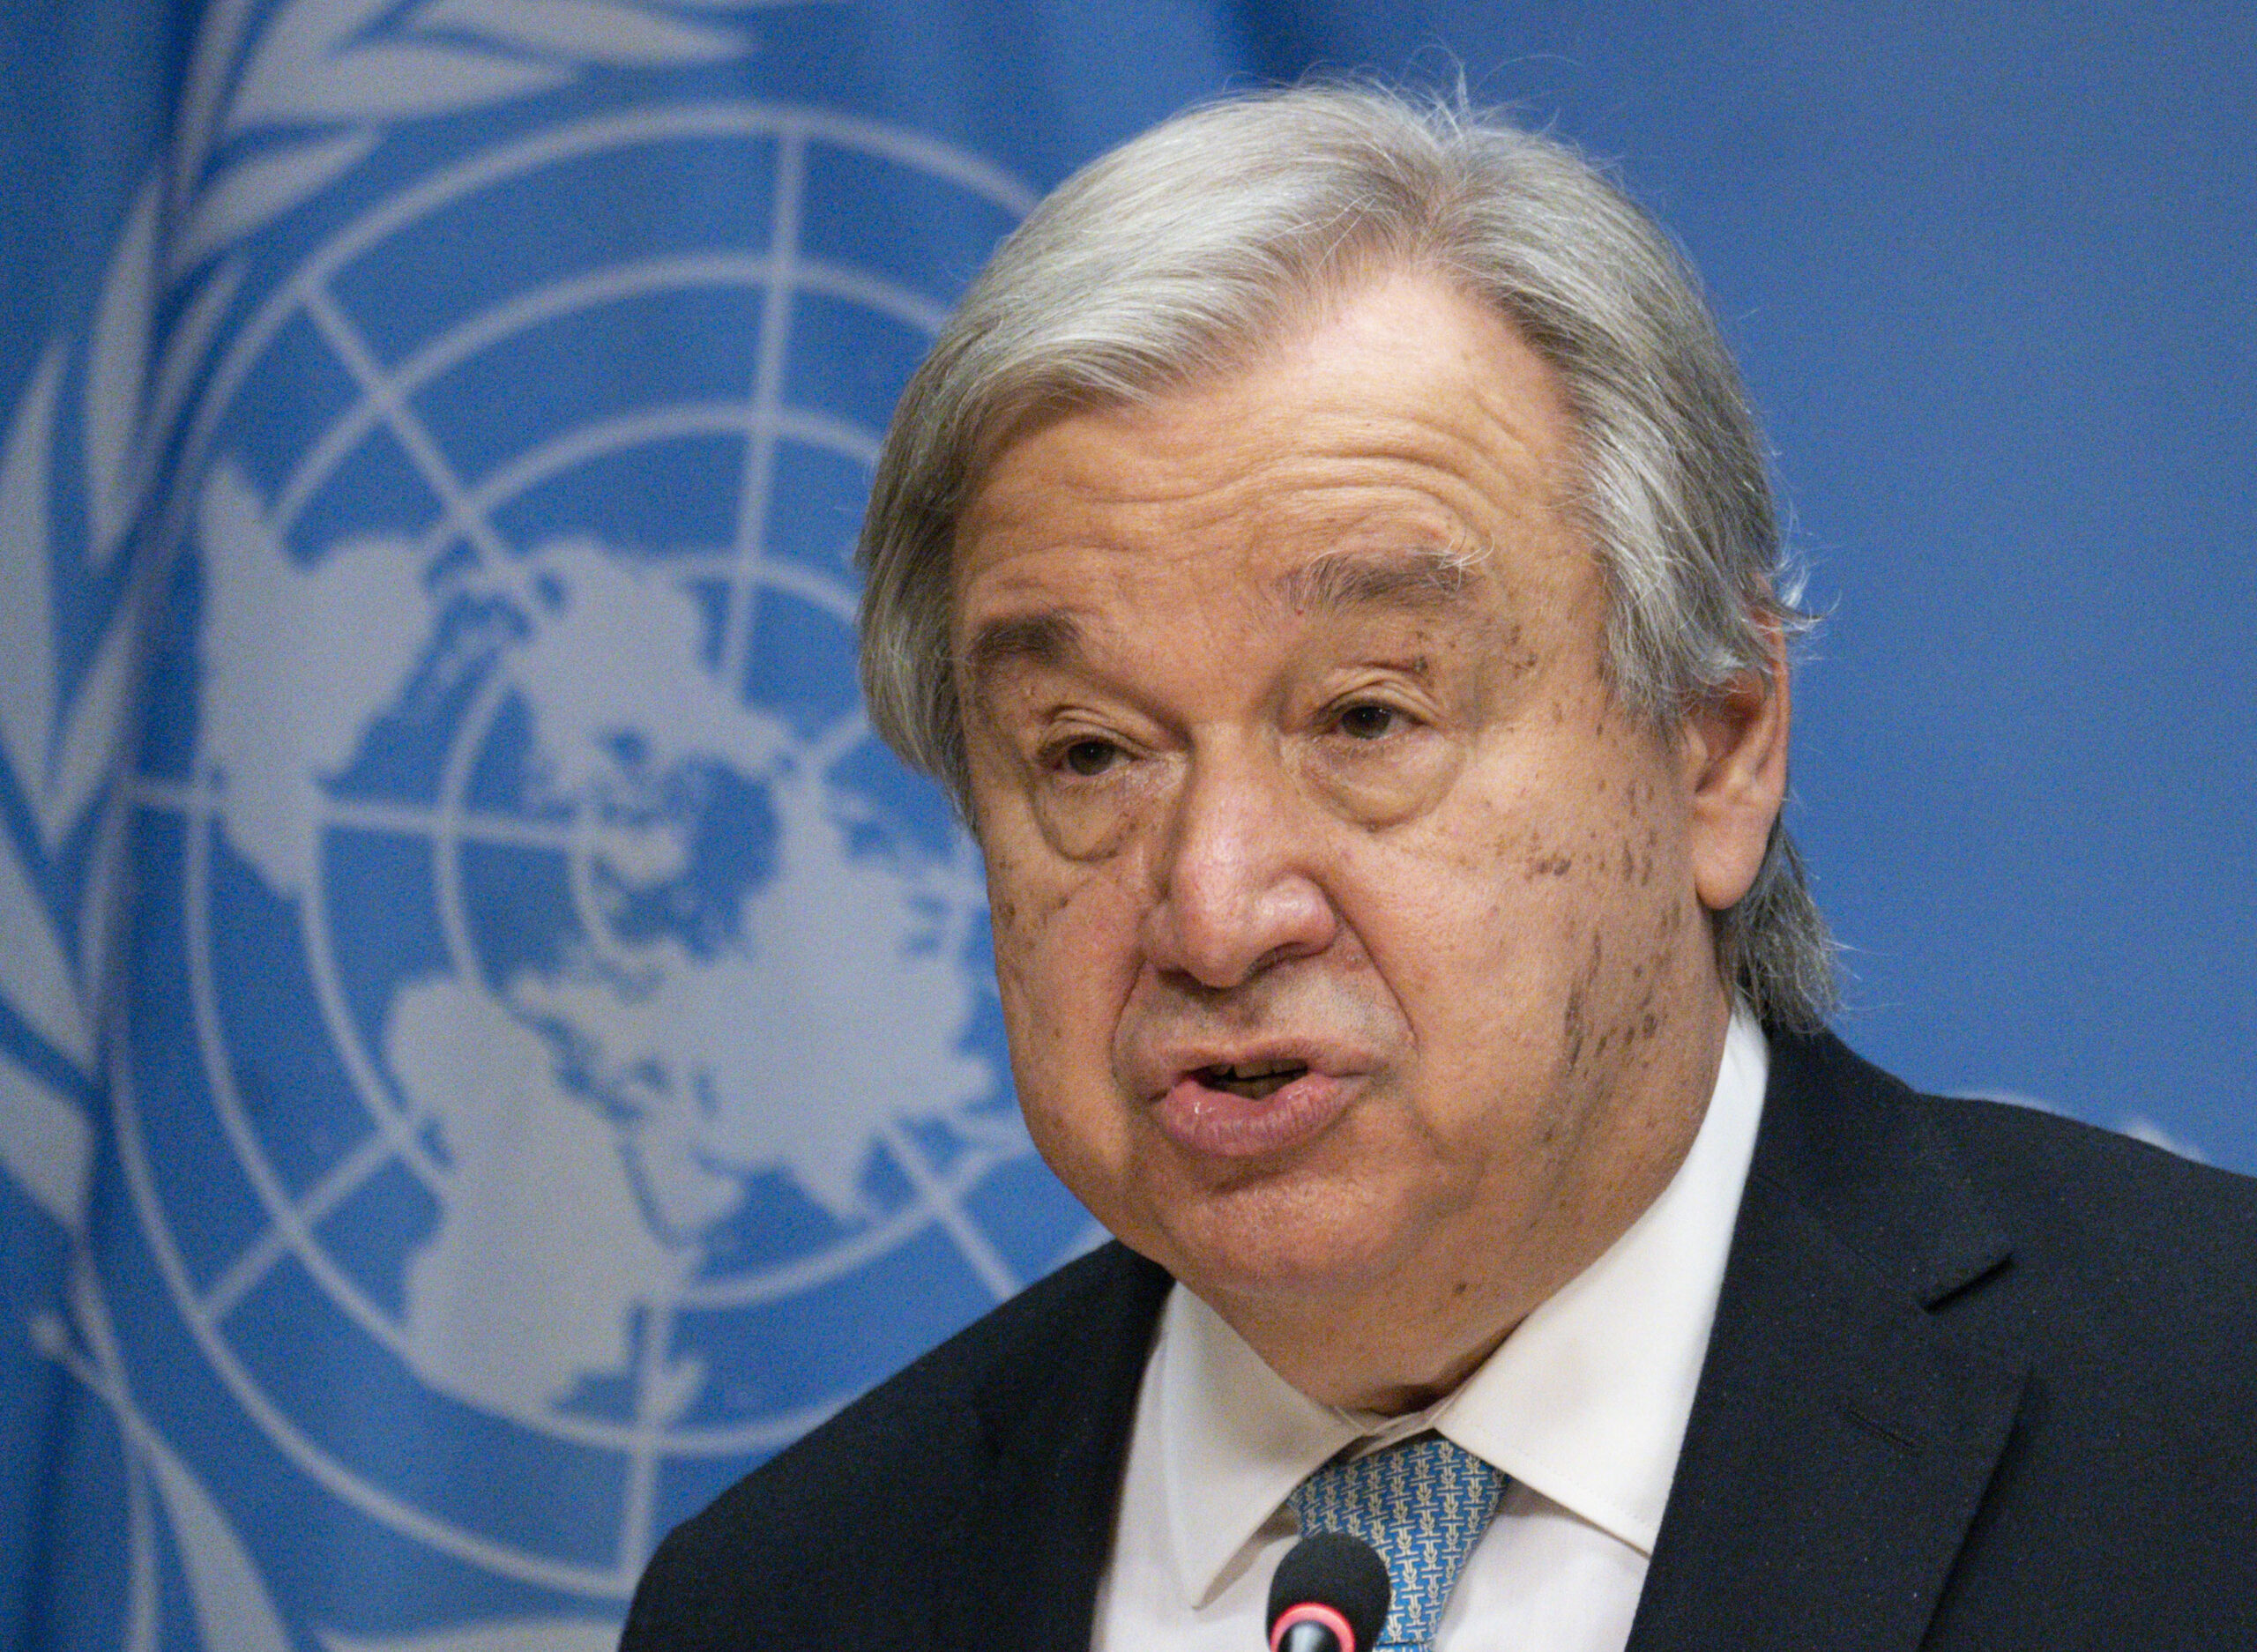 FILE -- United Nations Secretary-General Antonio Guterres addresses reporters during a news conference in New York, United States, Wednesday, June 8, 2022. The head of the United Nations has warned the world faces 'catastrophe' because of the growing shortage of food around the globe. (AP Photo/Mary Altaffer, file)